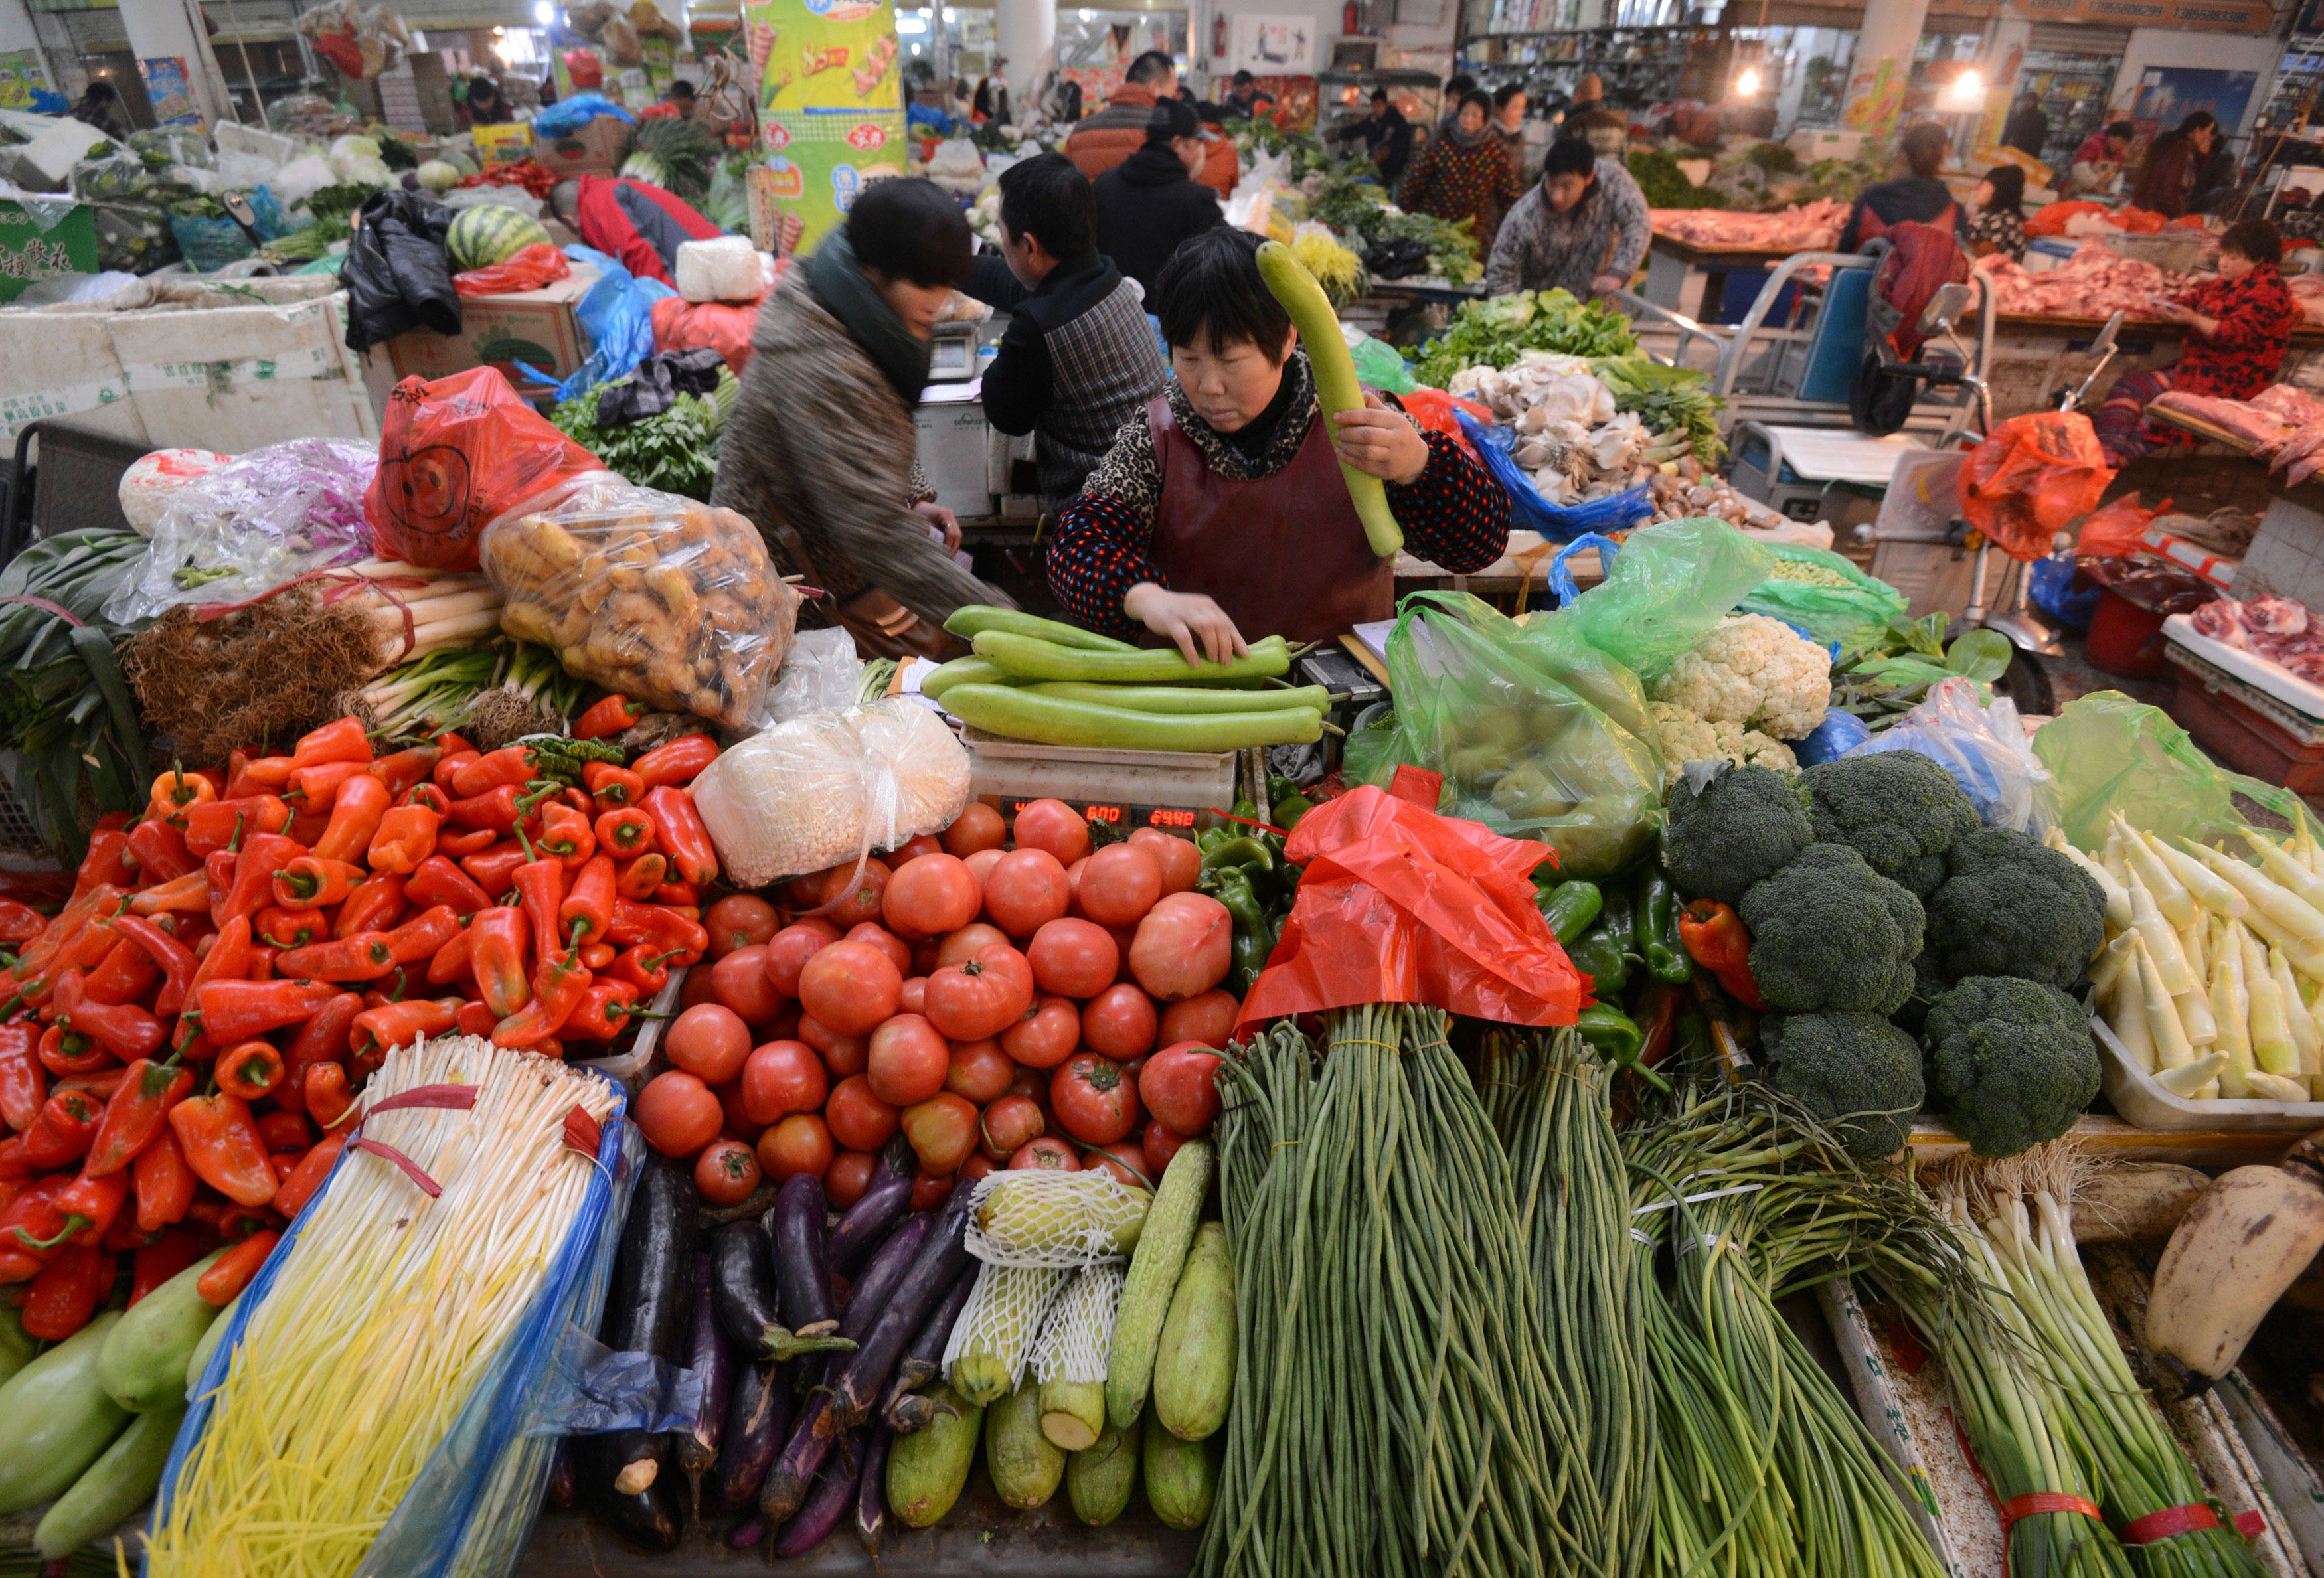 Consumer inflation rose to 5.11% in January, industrial growth moderated in December